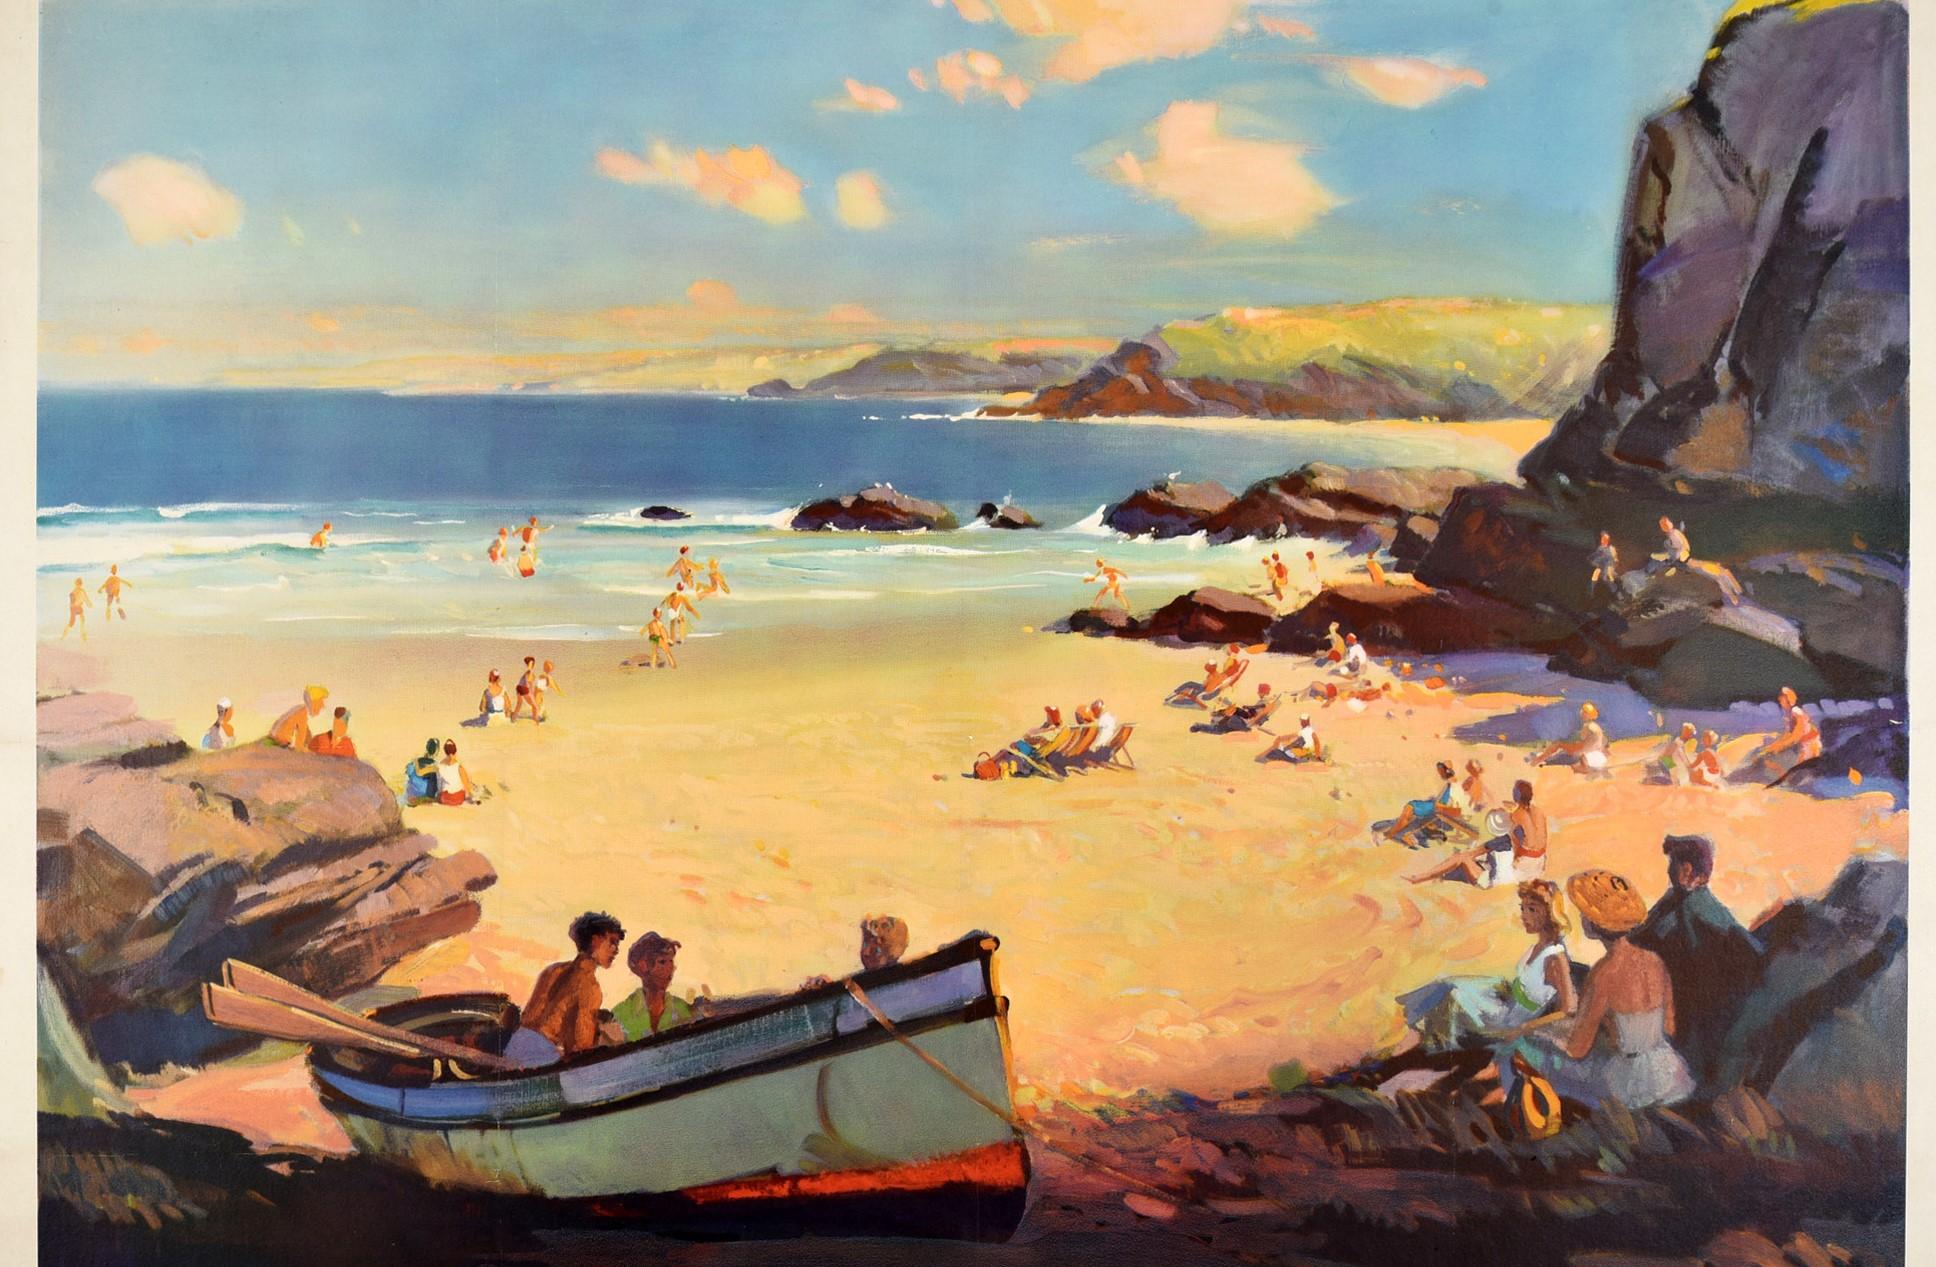 Original vintage travel poster for Cornwall issued by British Railways - Travel By Train - featuring a great illustration of families and tourists relaxing on a sandy beach in a rocky cove with children playing in a rowing boat in the foreground,